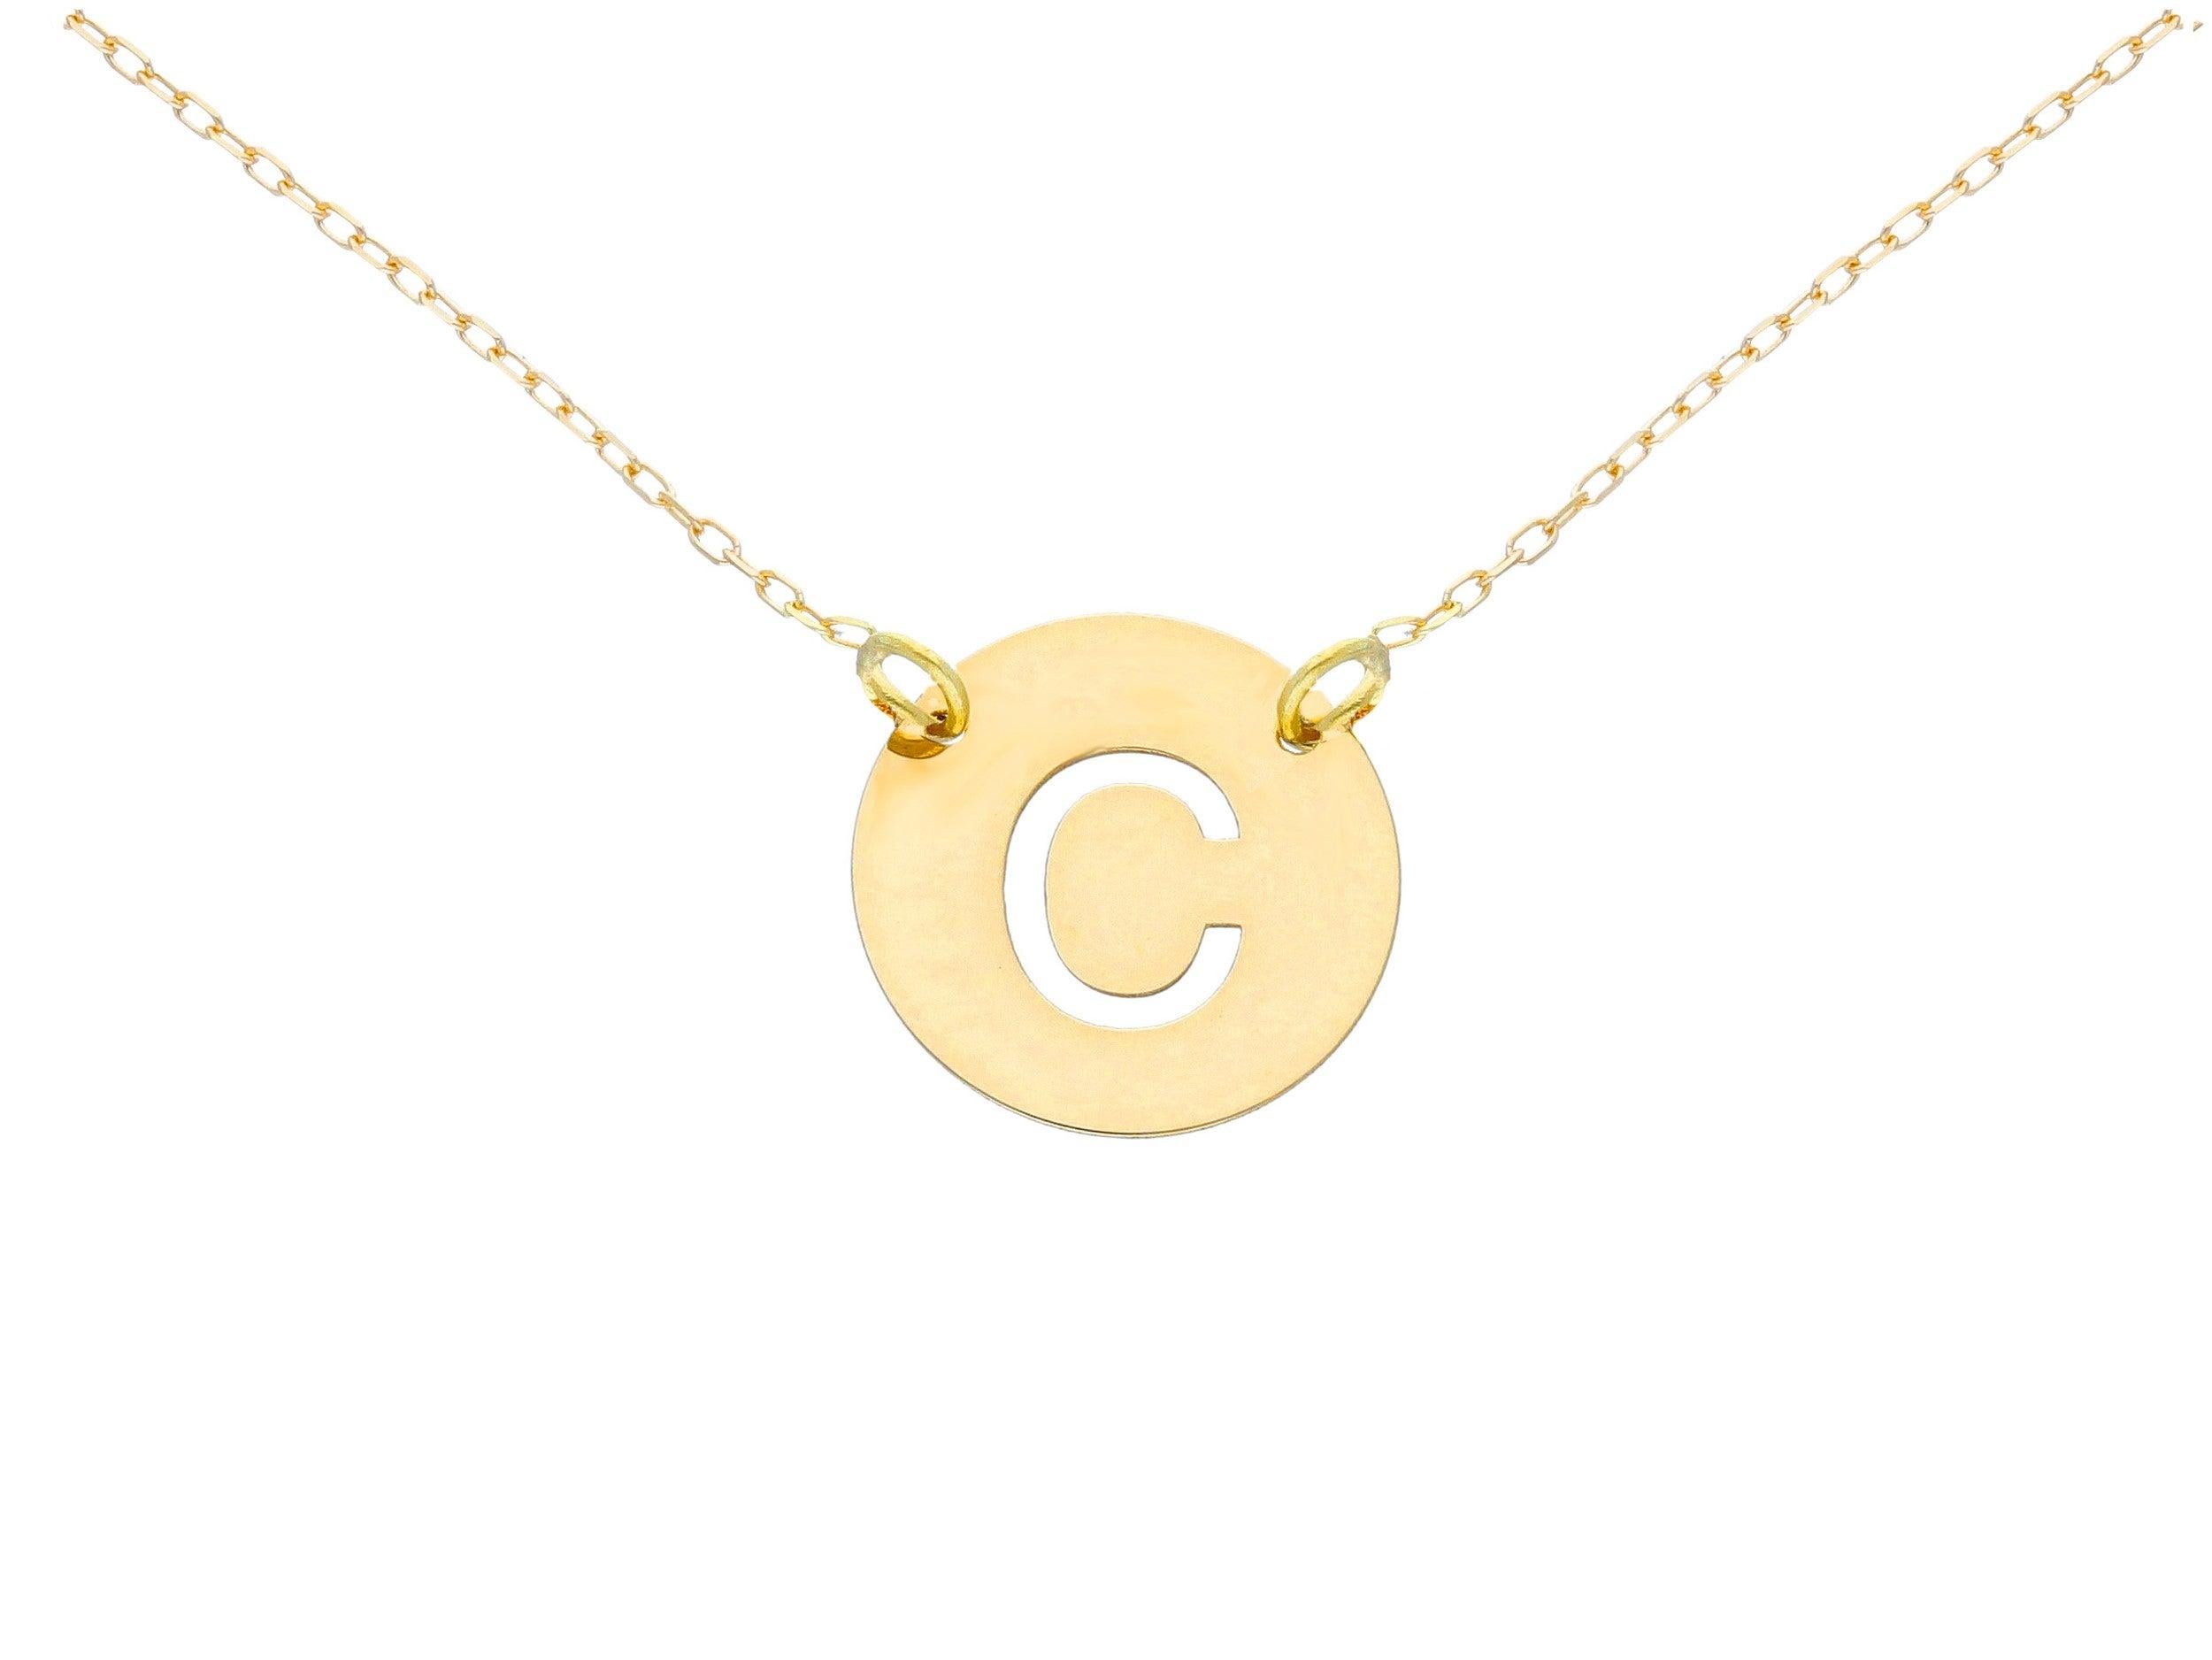 Pradera Letter B chain pendant necklace in 18k yellow gold.

It weighs 1.7 grams with chain, and measures 44cm/17.3 in.
It is made with 100% recycled gold, which features soft edges for a comfortable fit.
Also available in white gold and pink